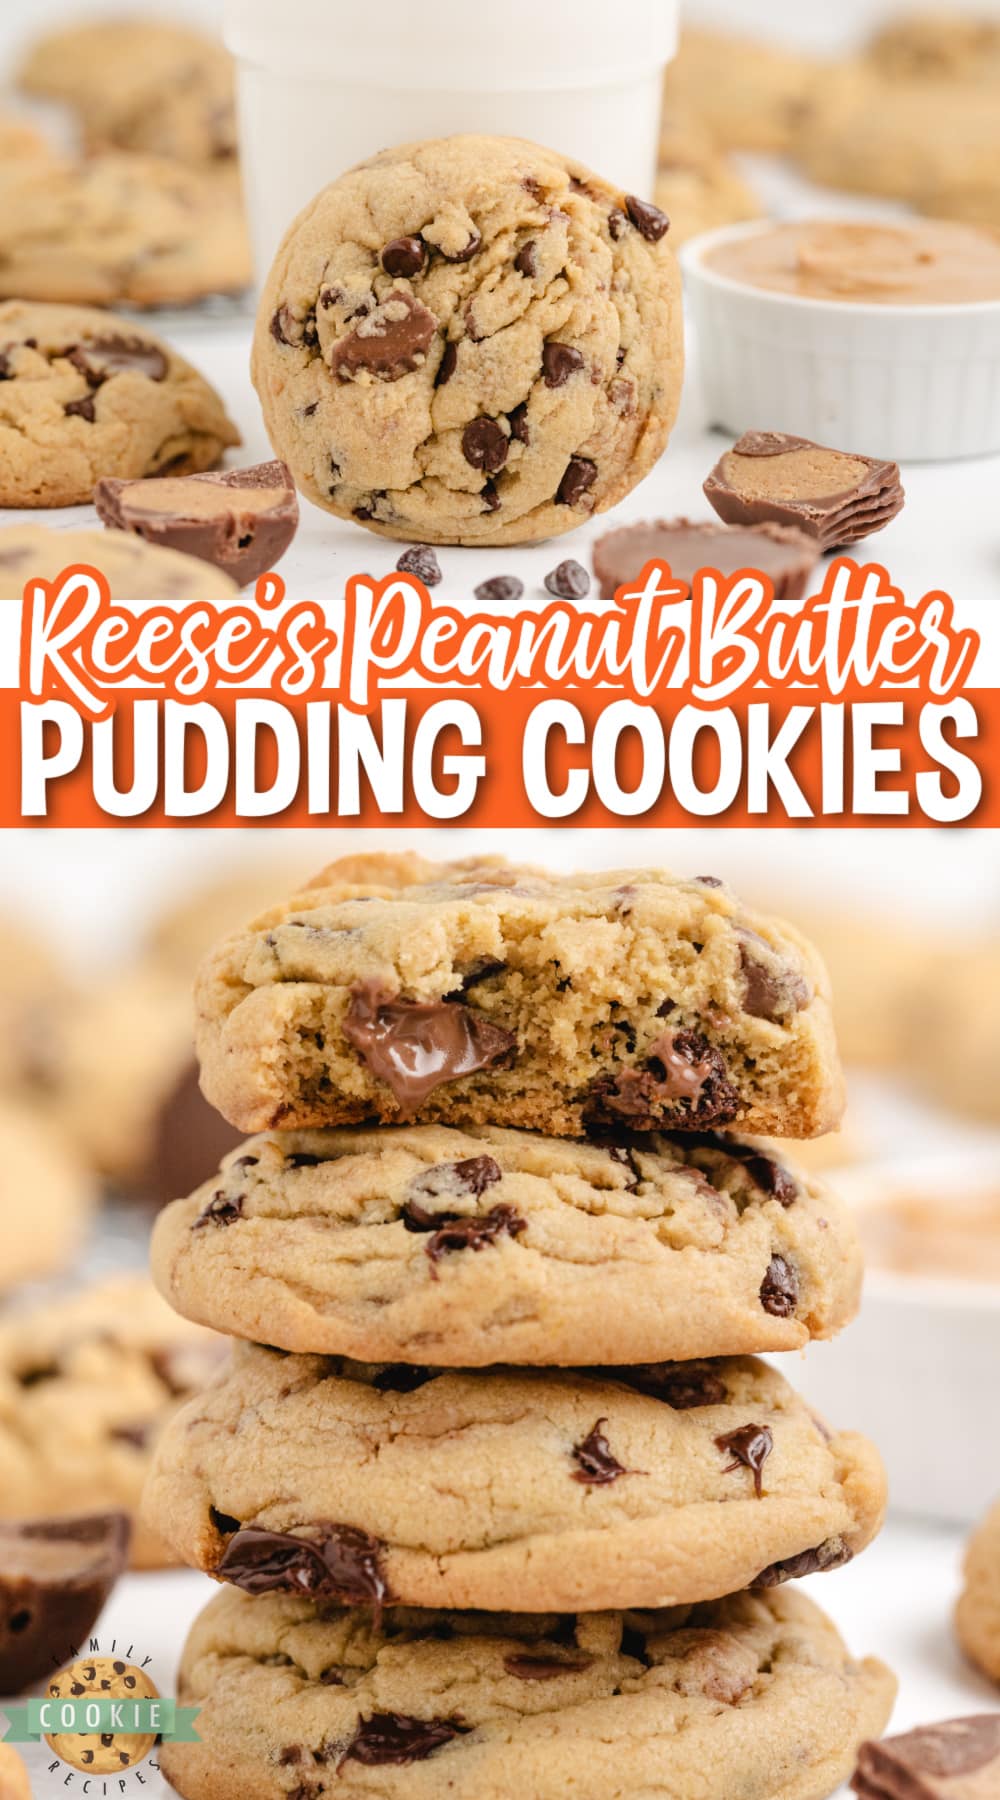 Reese's Peanut Butter Pudding Cookies are soft and chewy peanut butter cookies made with vanilla pudding mix and chunks of Reese's peanut butter cups too!